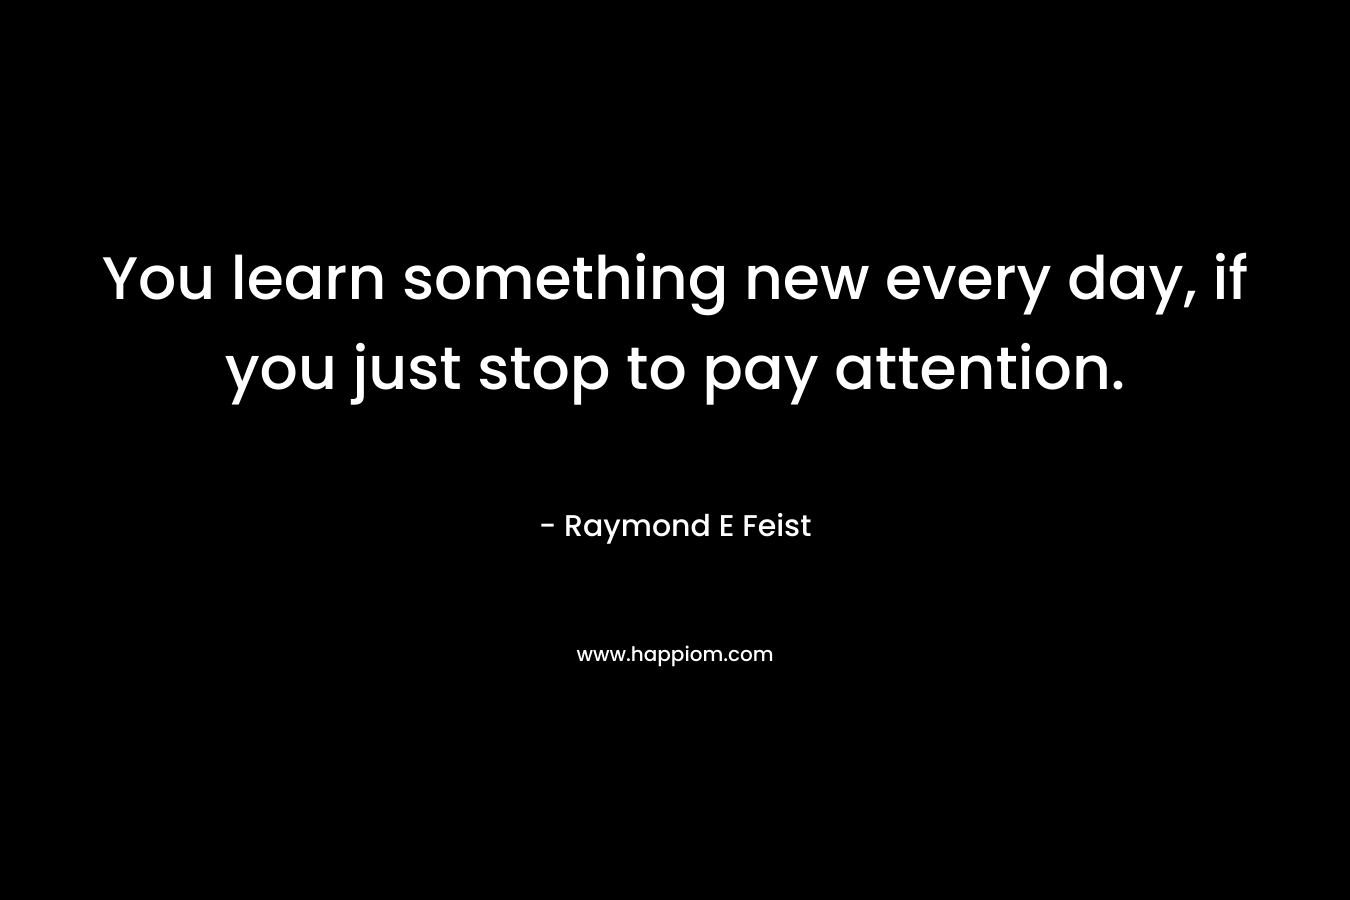 You learn something new every day, if you just stop to pay attention. – Raymond E Feist